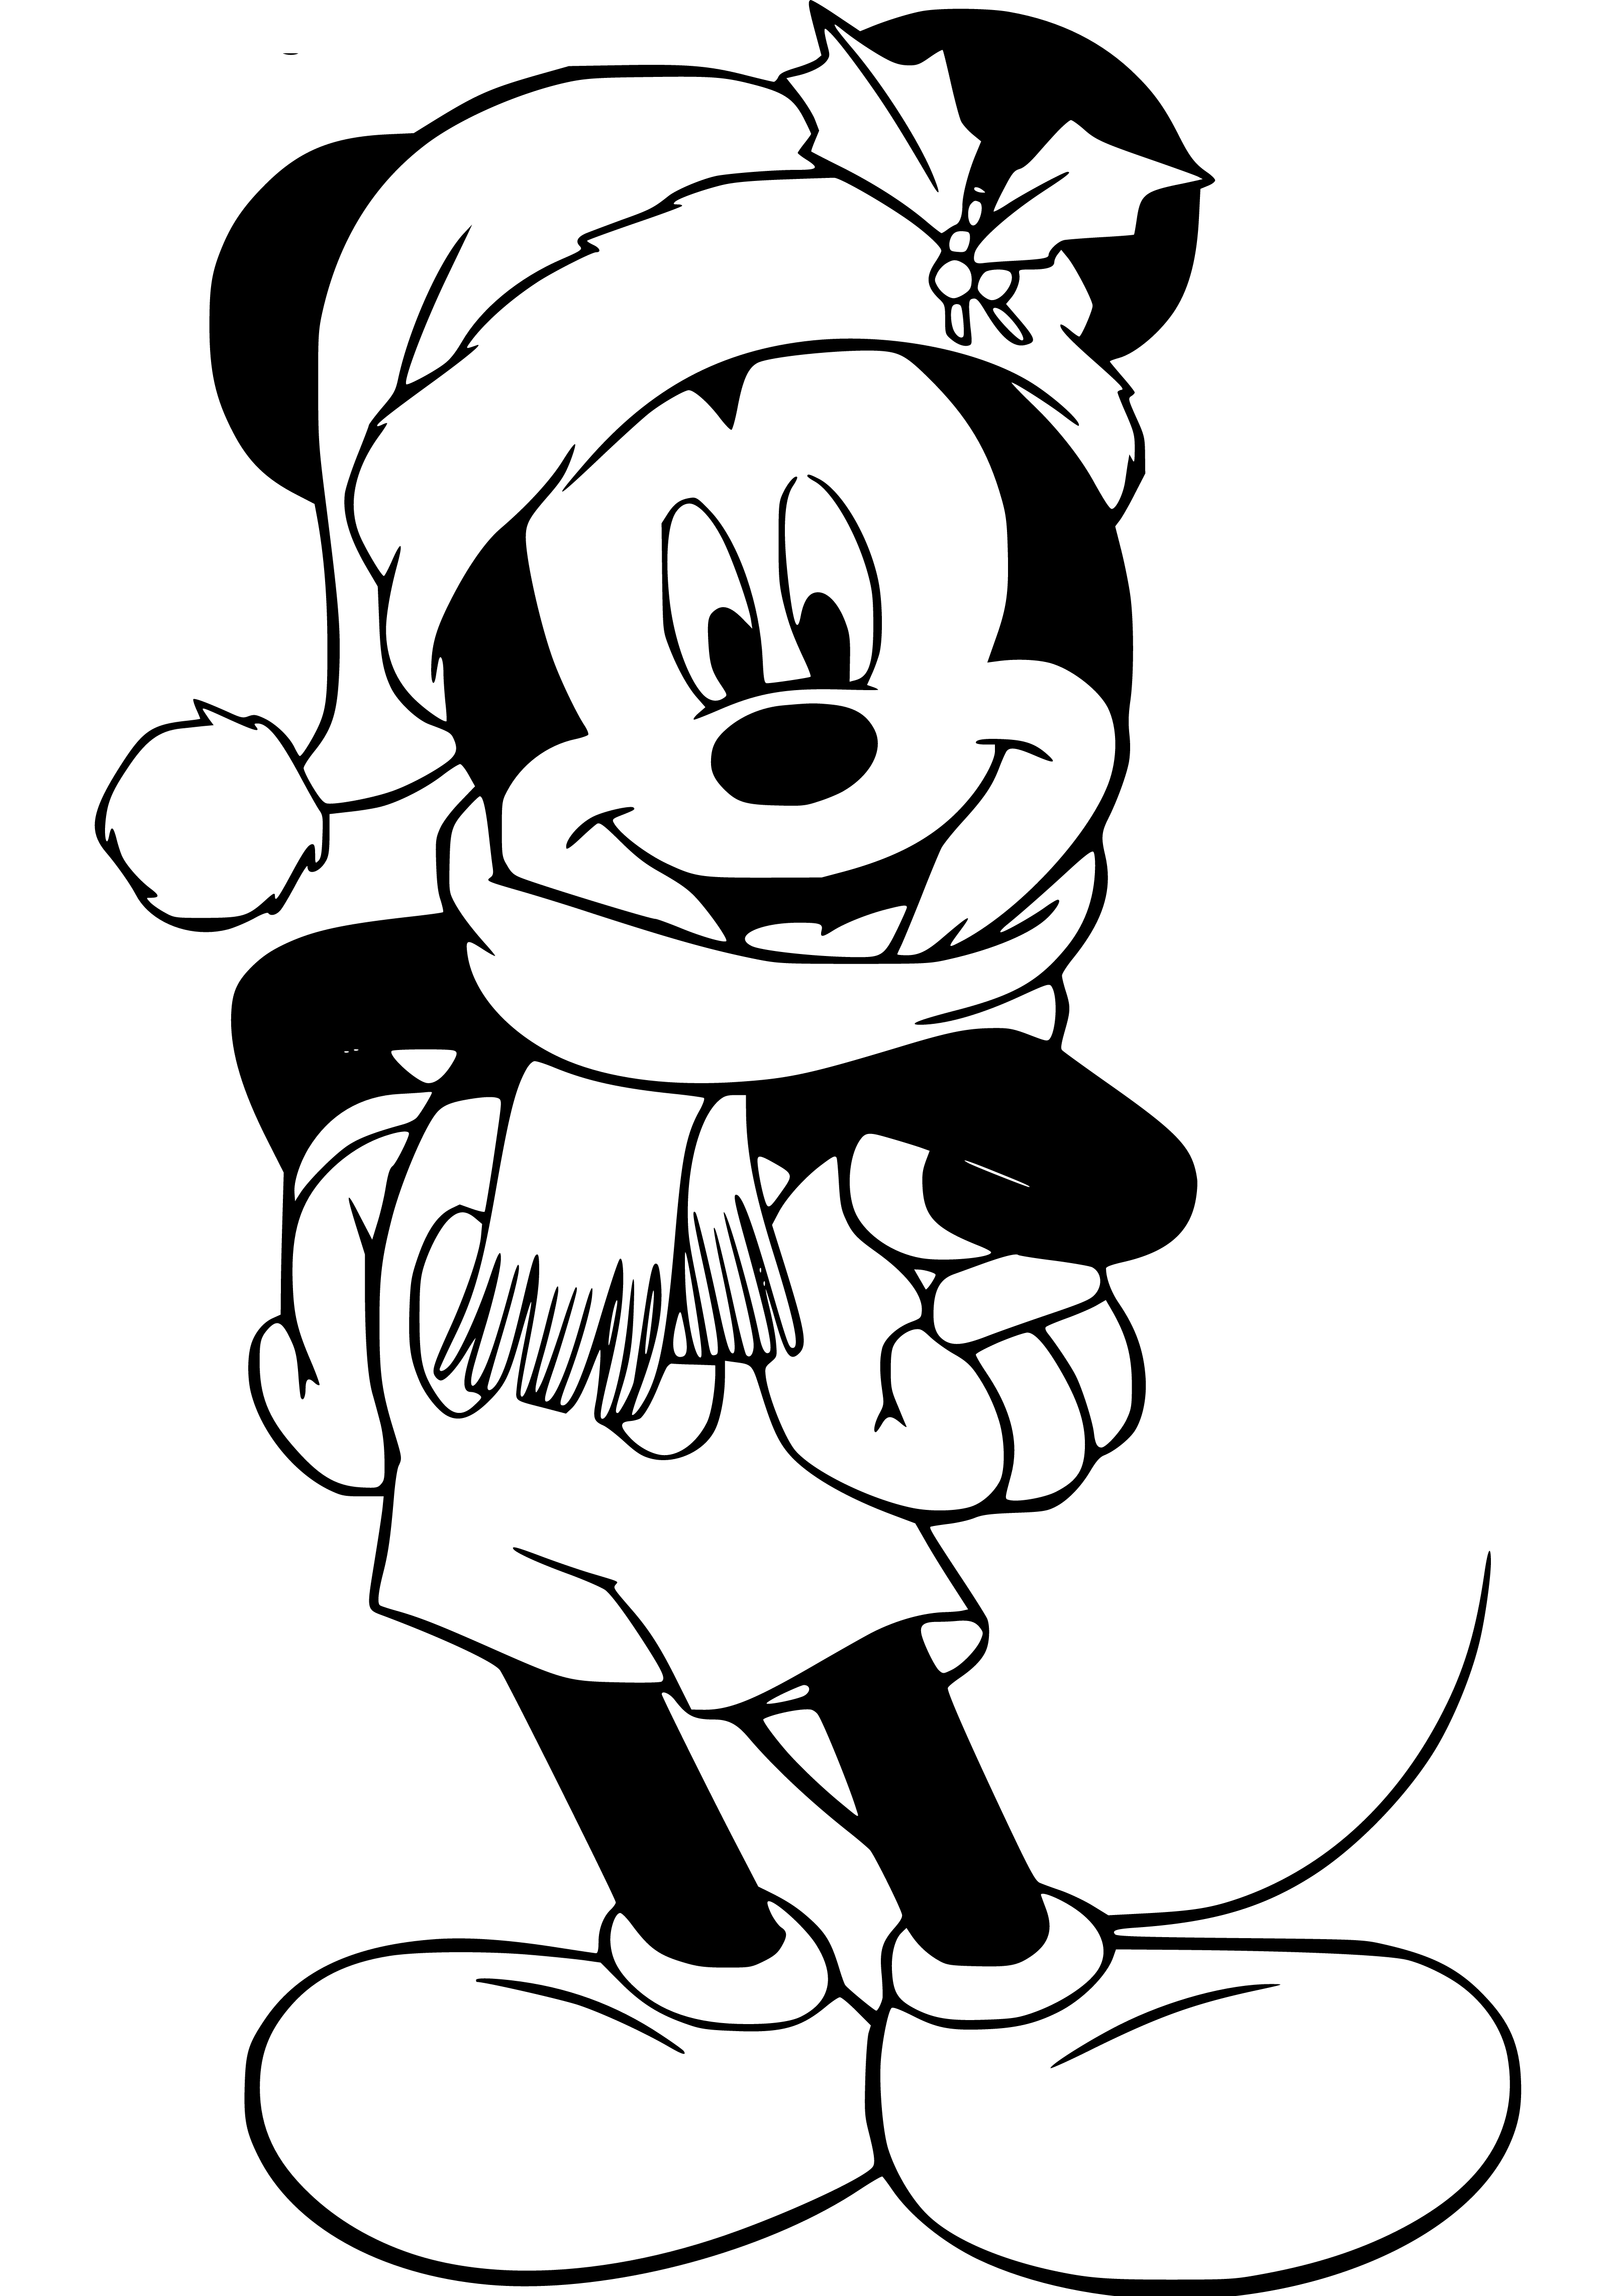 Printable Mickey Mouse Coloring Page for kids.